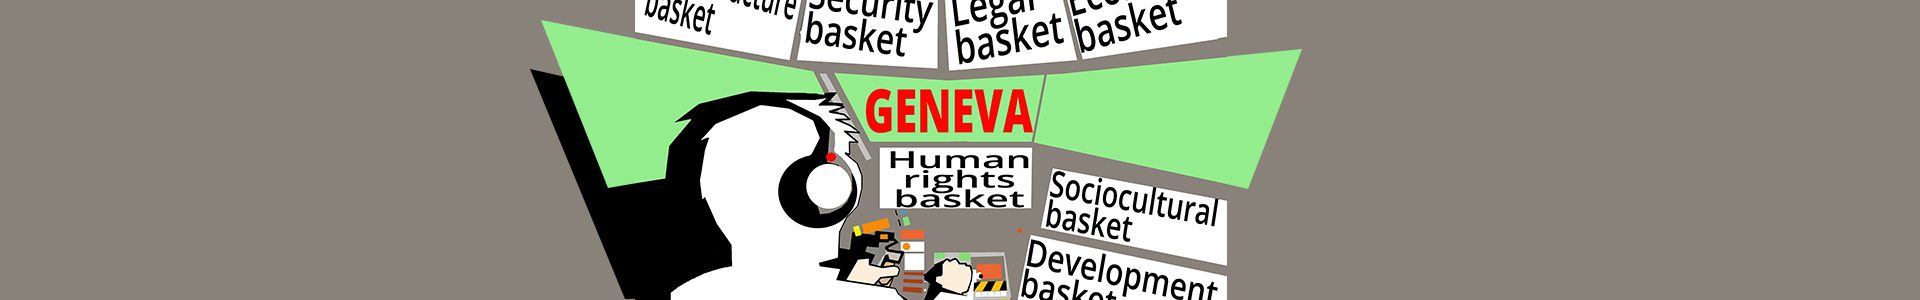 Digital Policy and Diplomacy Geneva based course